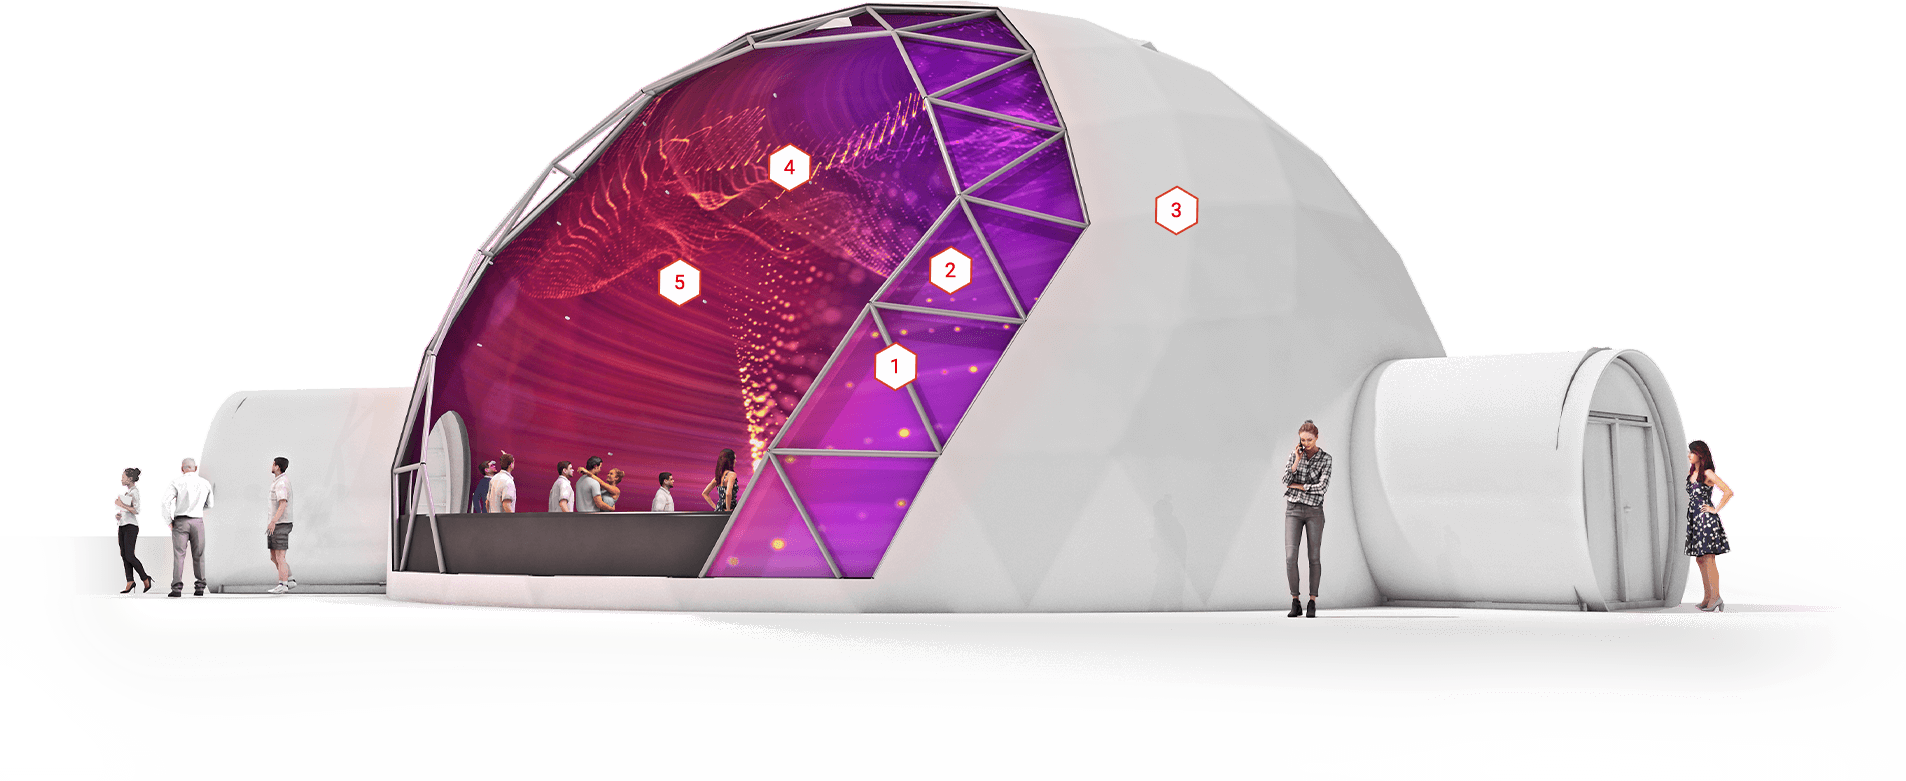 Fulldome 360 projection dome with two entrances ( scheme and cross-section )